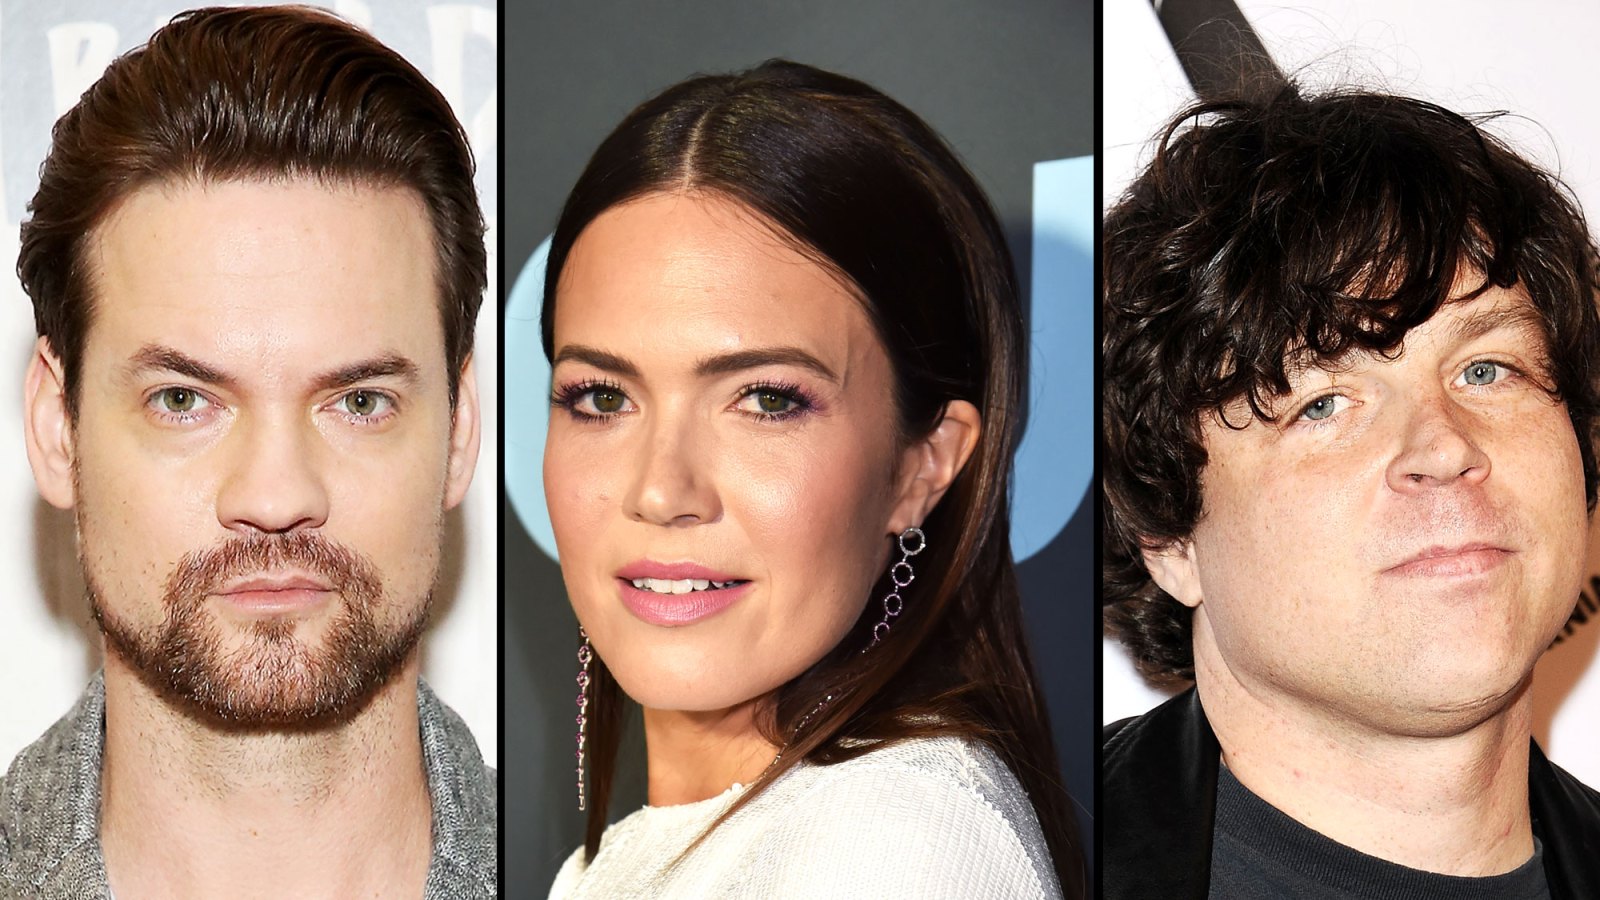 Shane West Calls Mandy Moore the 'Strongest Woman He Knows' After She Speaks Out About Ryan Adams